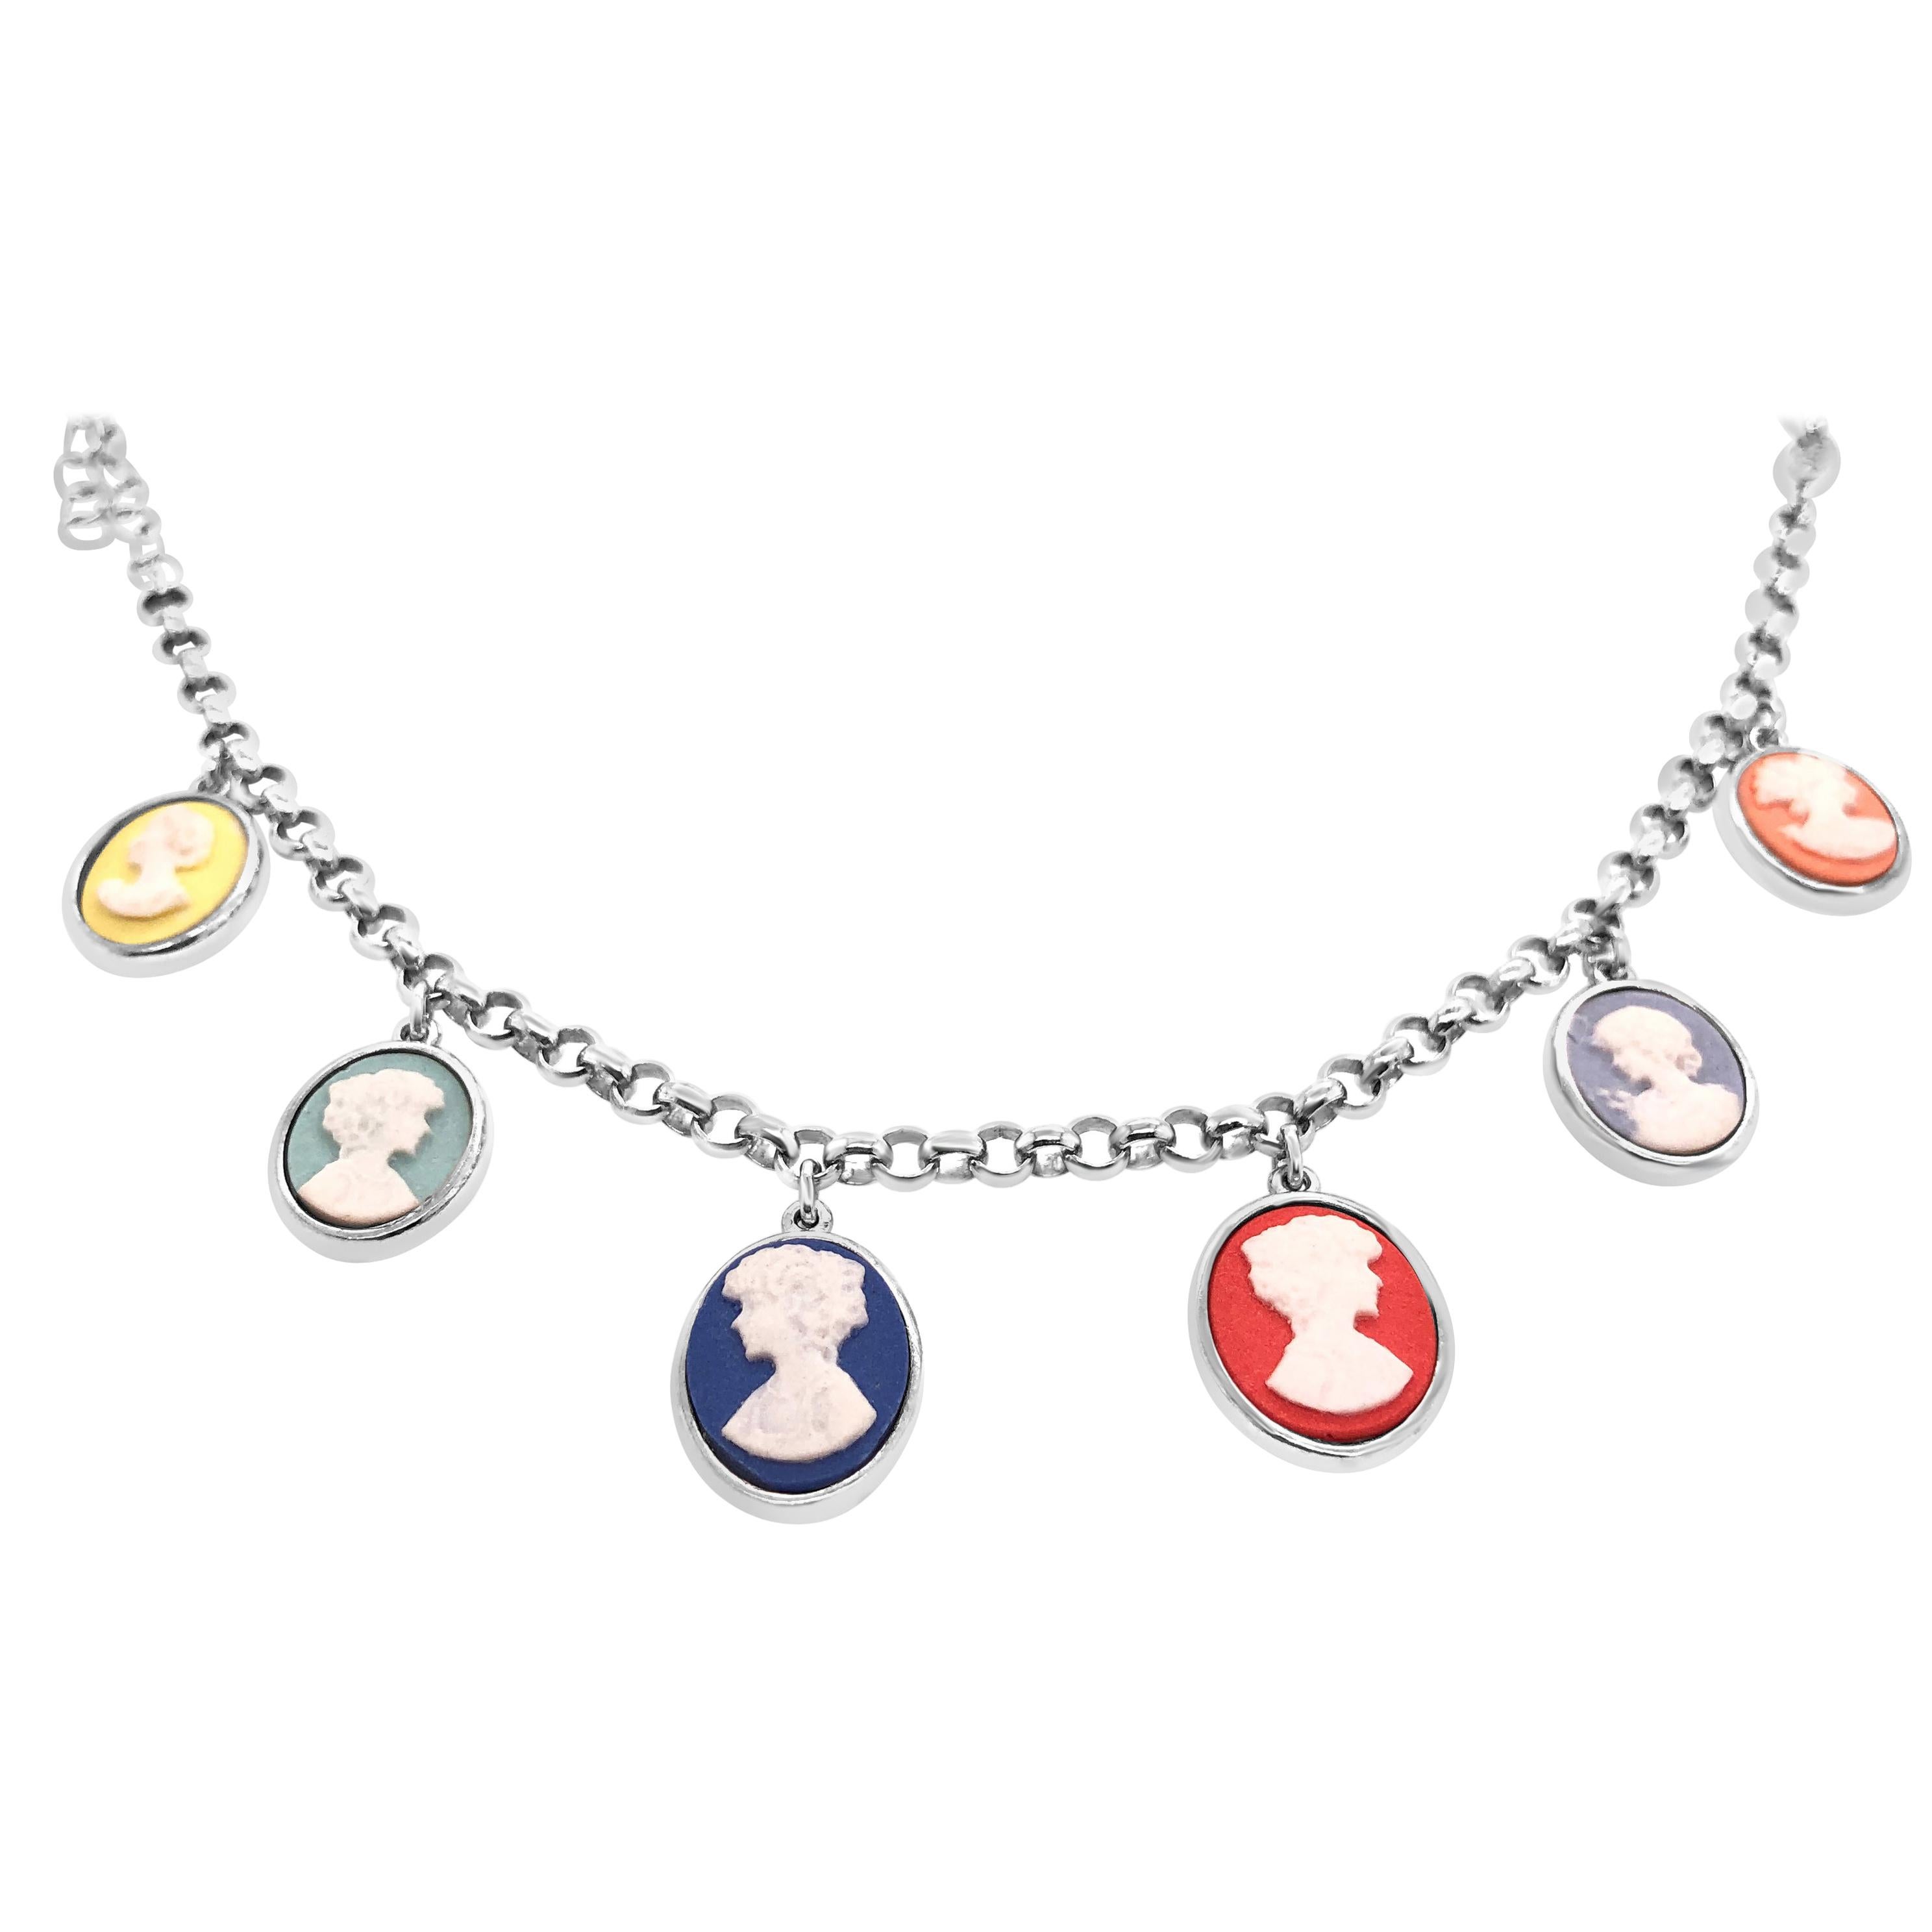 Beautifully hand crafted porcelain cameo mounted in rhodium plated sterling silver. With a modern look this fun charm bracelet is the perfect addition to your trendy wrist. Depicting the most classic cameo subject with a selection of vibrant colours